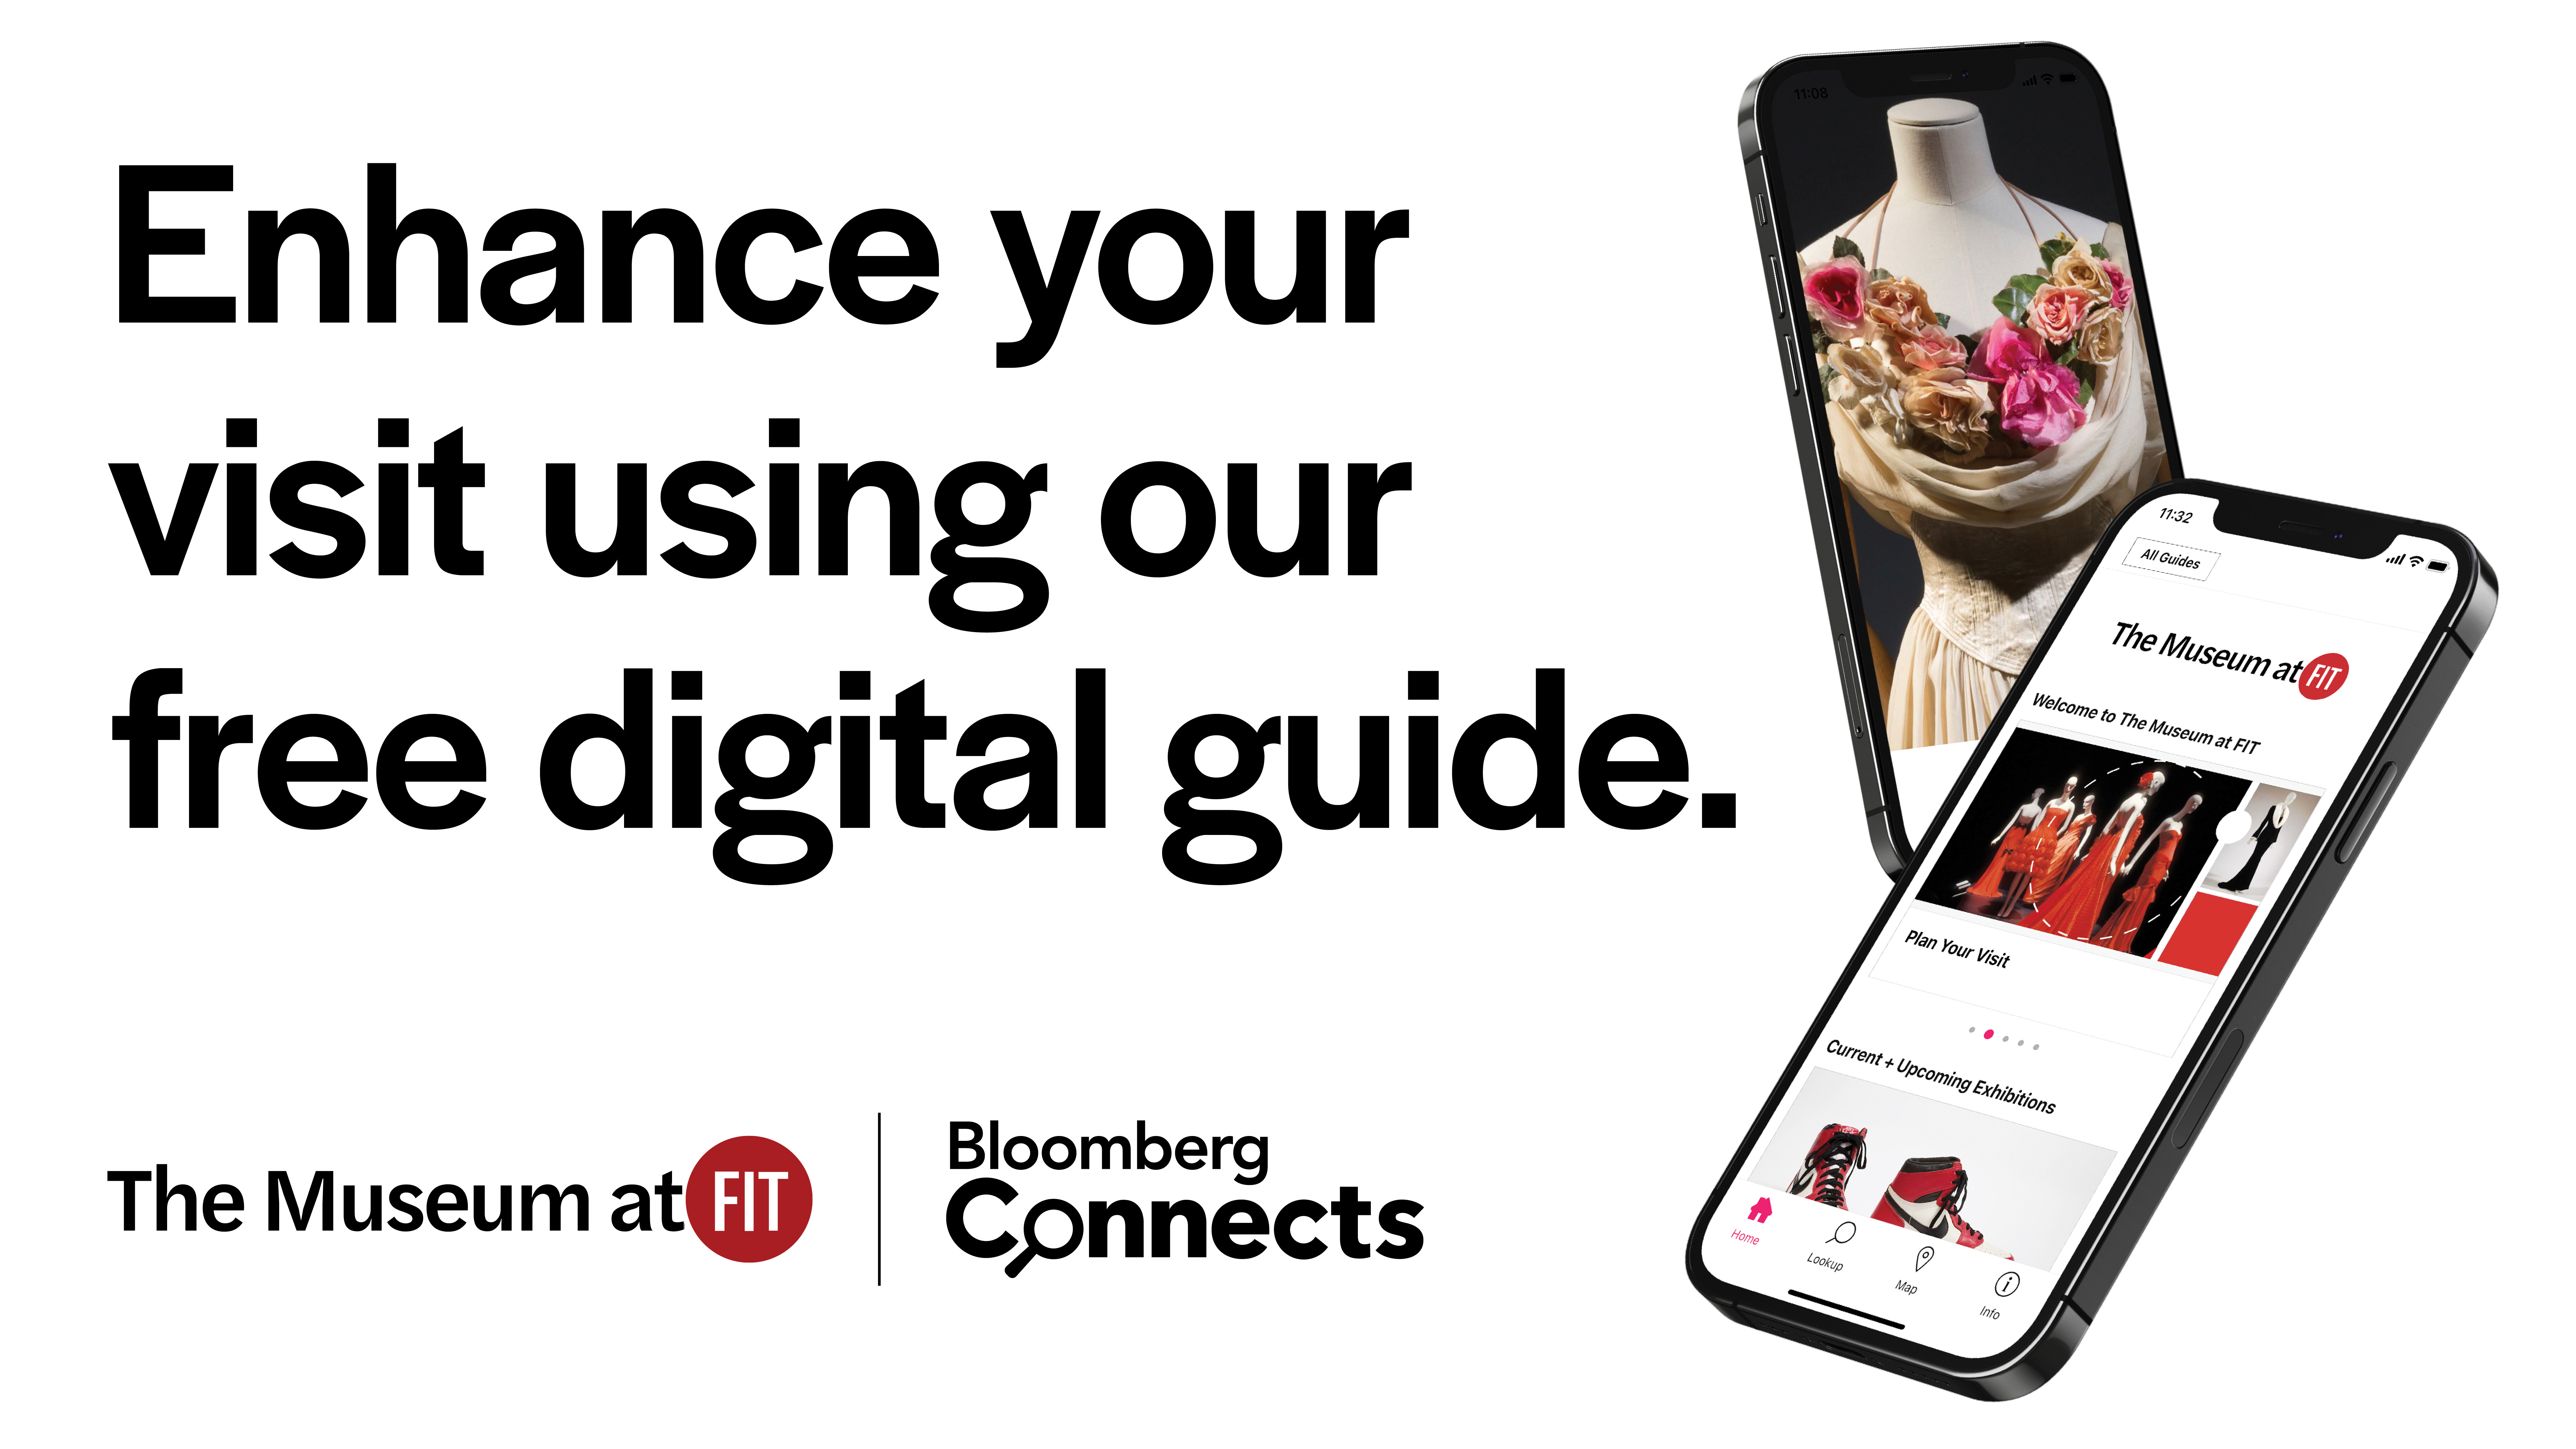 mfit on the bloomberg connects digital guide